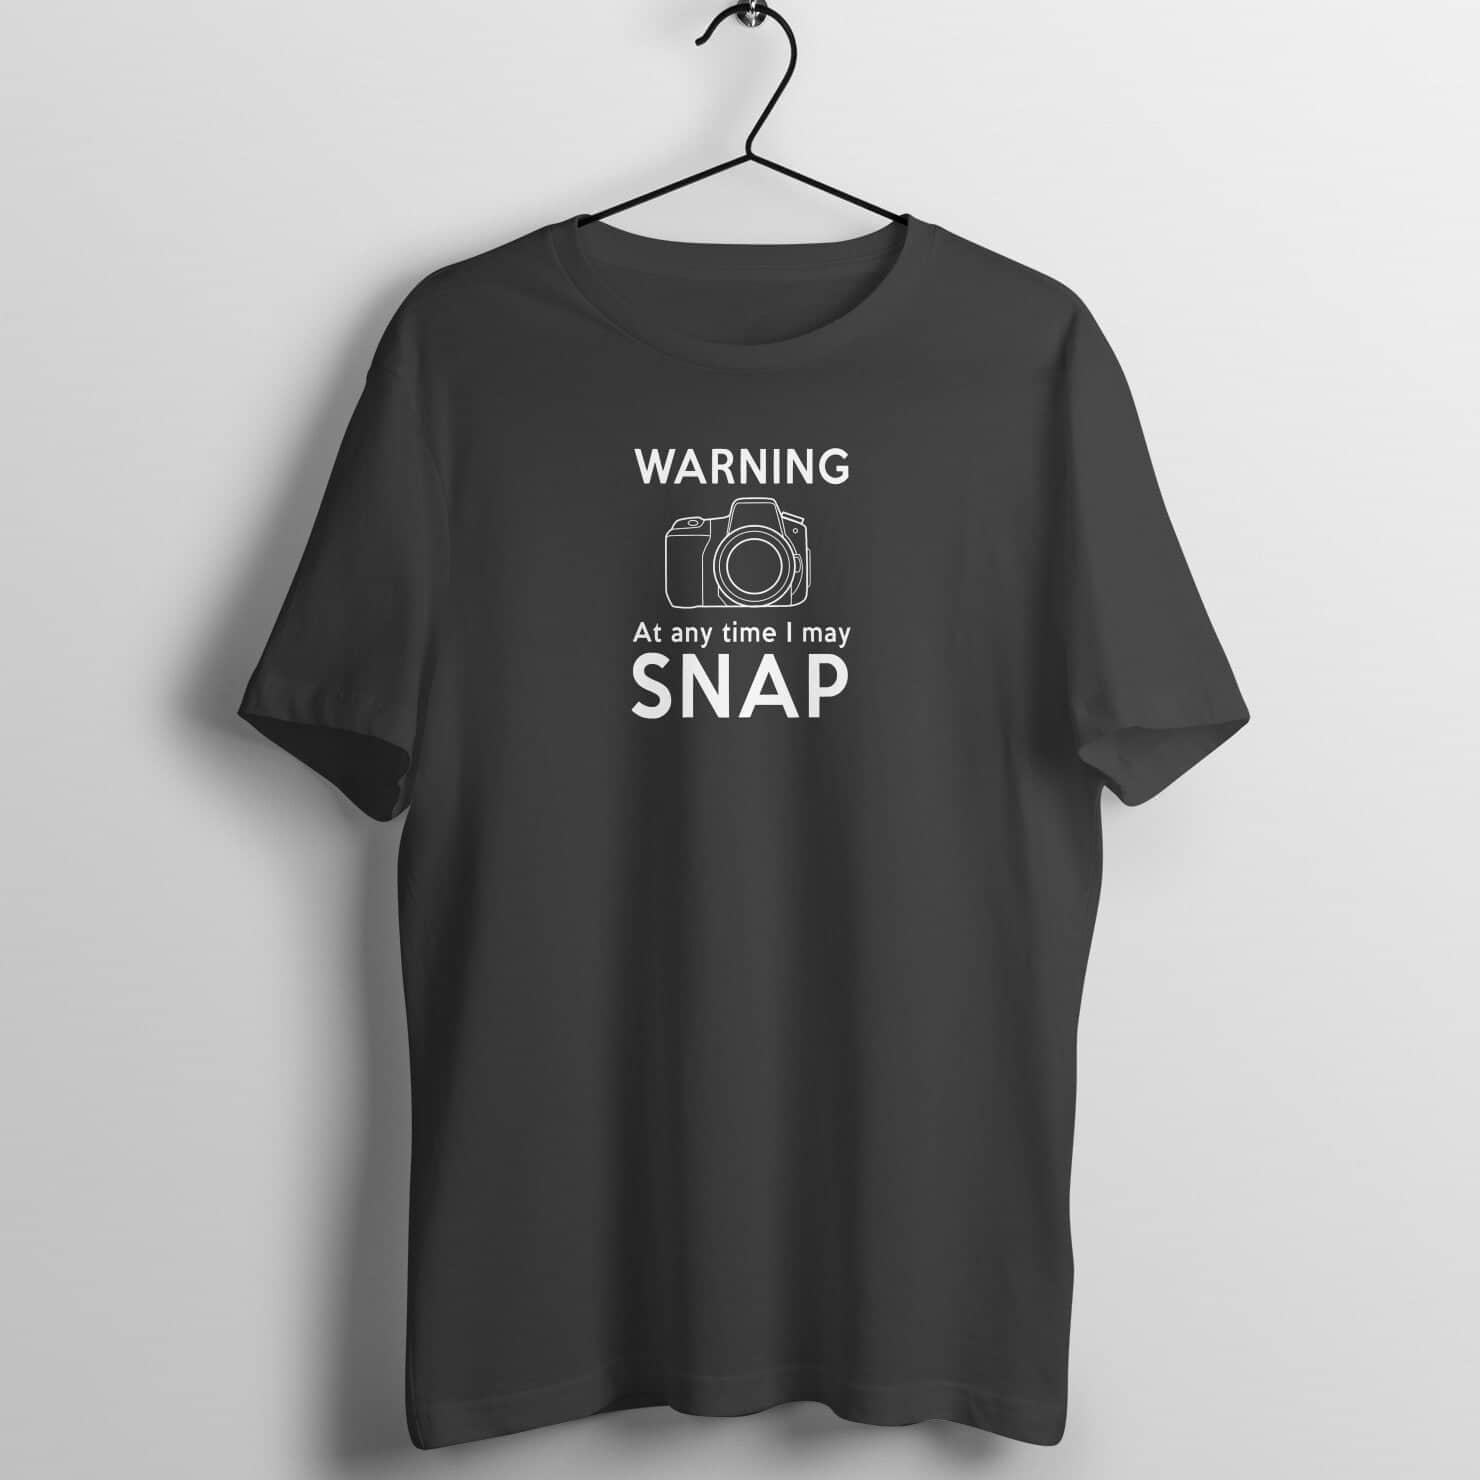 Warning At Any Time I May Snap Funny Photography T Shirt for Men and Women freeshipping - Catch My Drift India